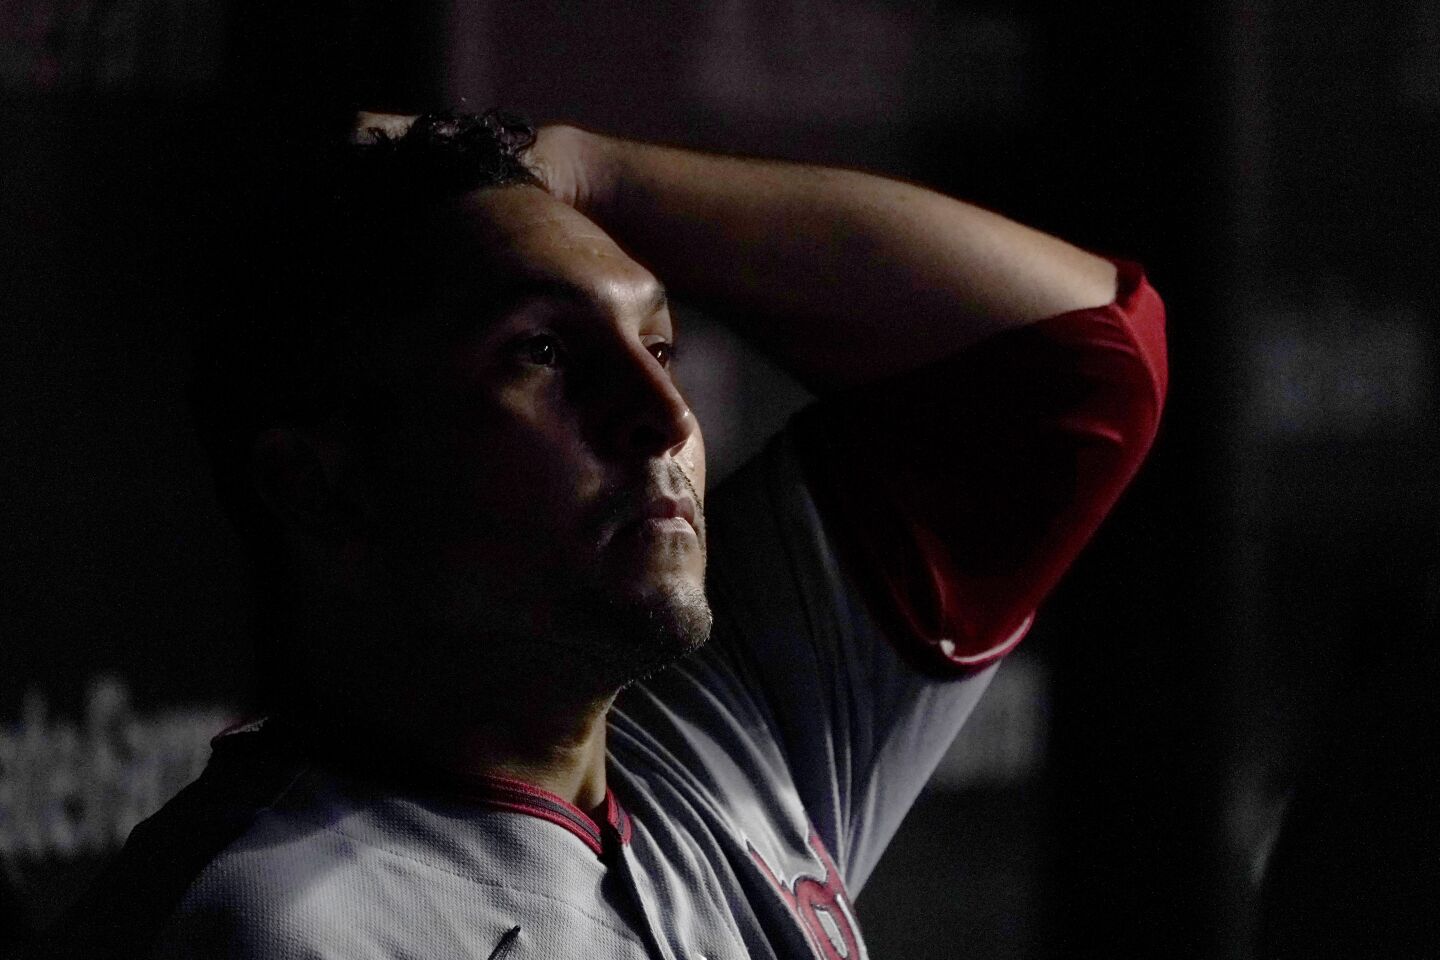 Game 3: Nationals RHP Paolo Espino (0-4, 4.04 ERA)The 35-year-old has a 2.03 ERA in 26 2/3 innings as a reliever and a 5.14 mark in 11 starts (49 innings). He has not gone deeper than 5 1/3 innings in any of his starts, but allowed just one run in five innings in his last start at Wrigley Field on Tuesday.